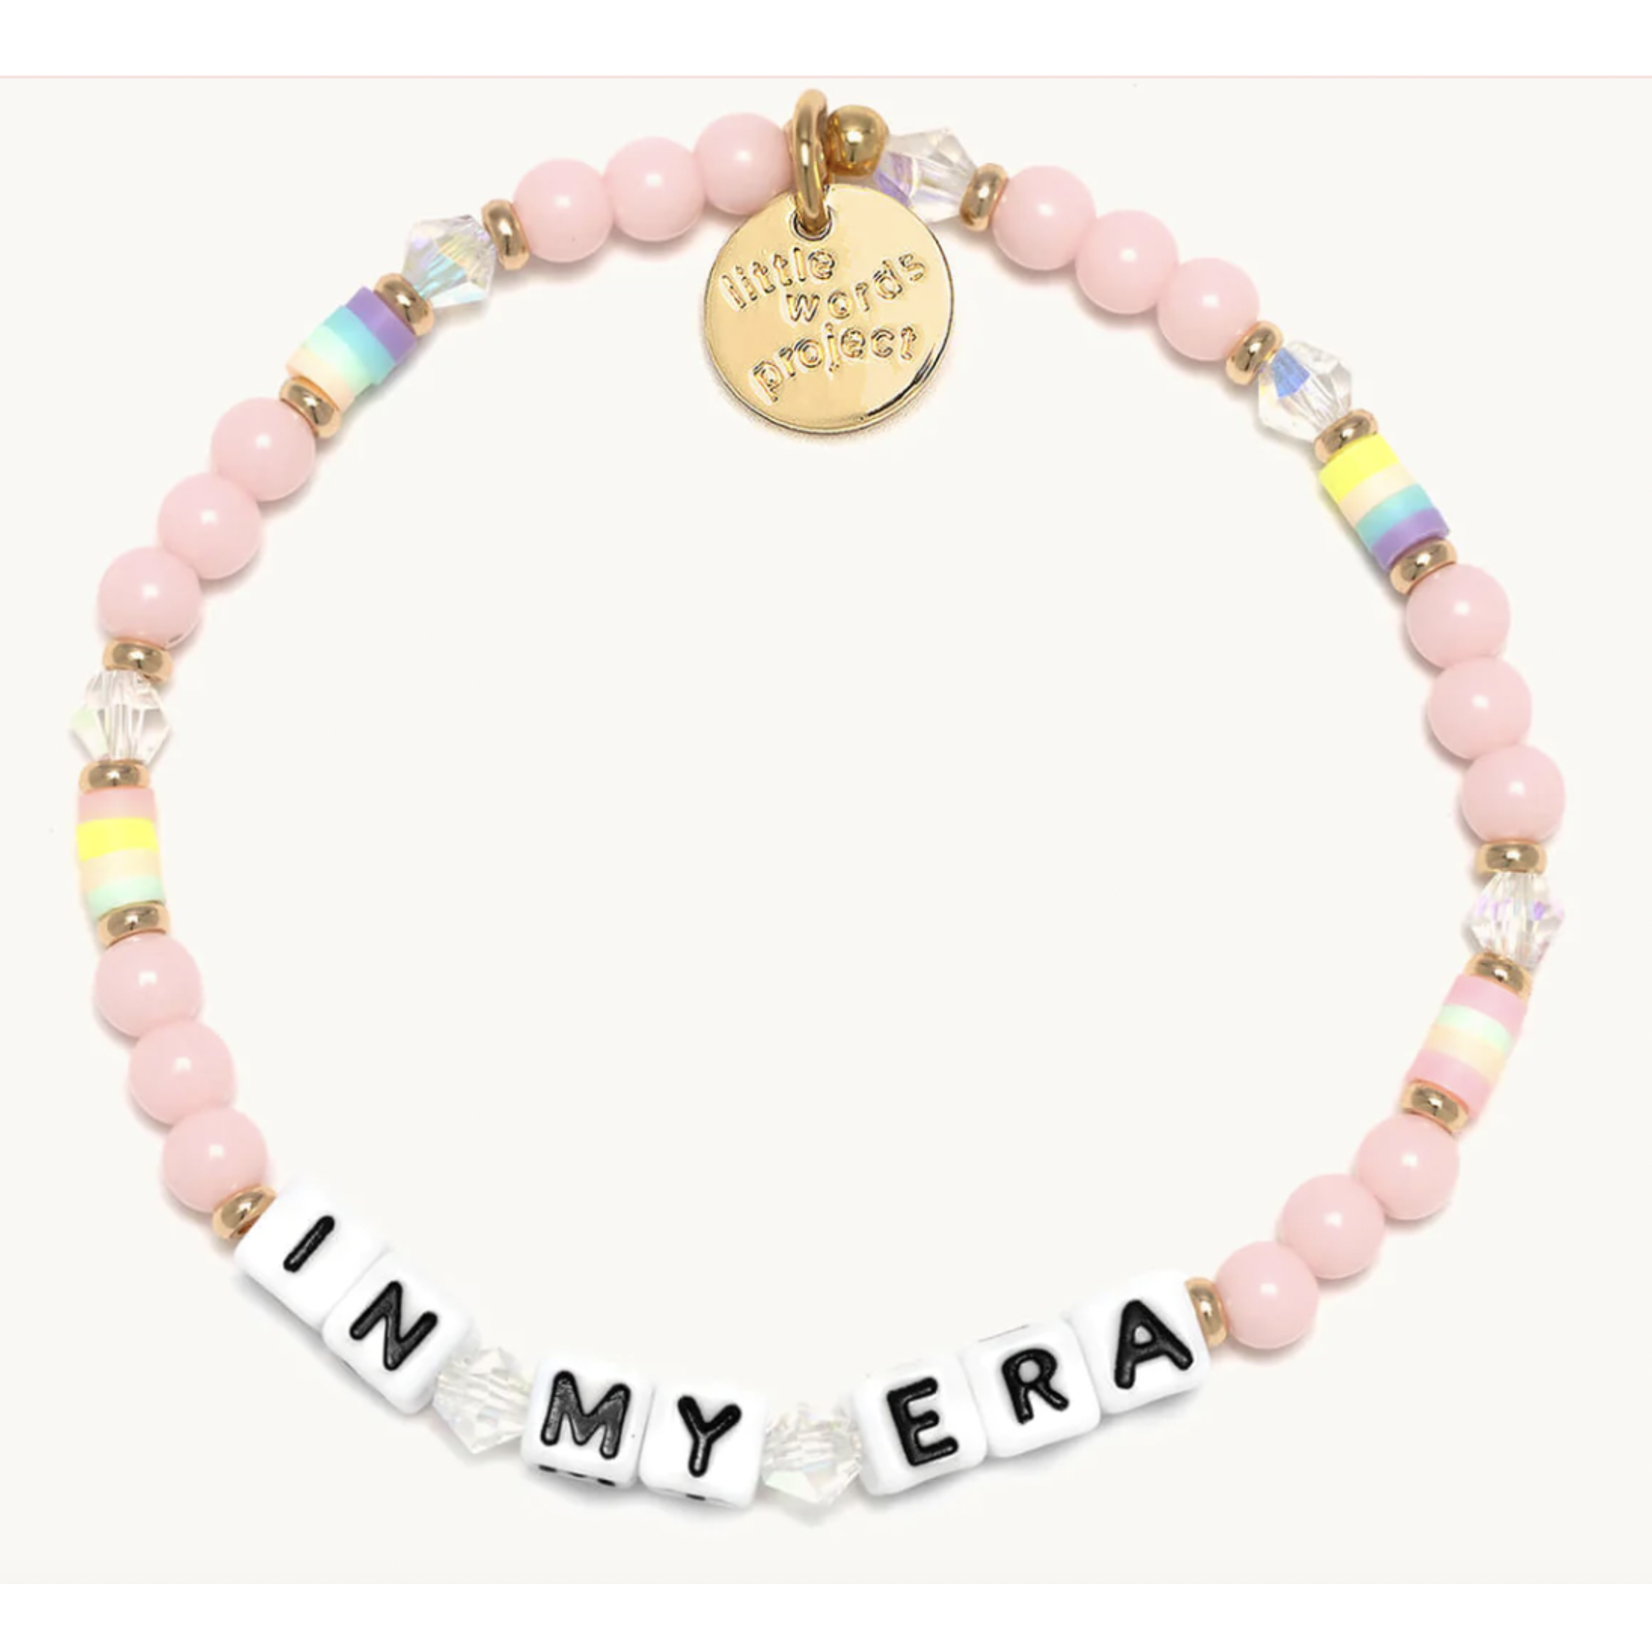 Little Words Project In My Era - Pink Frosting M/L